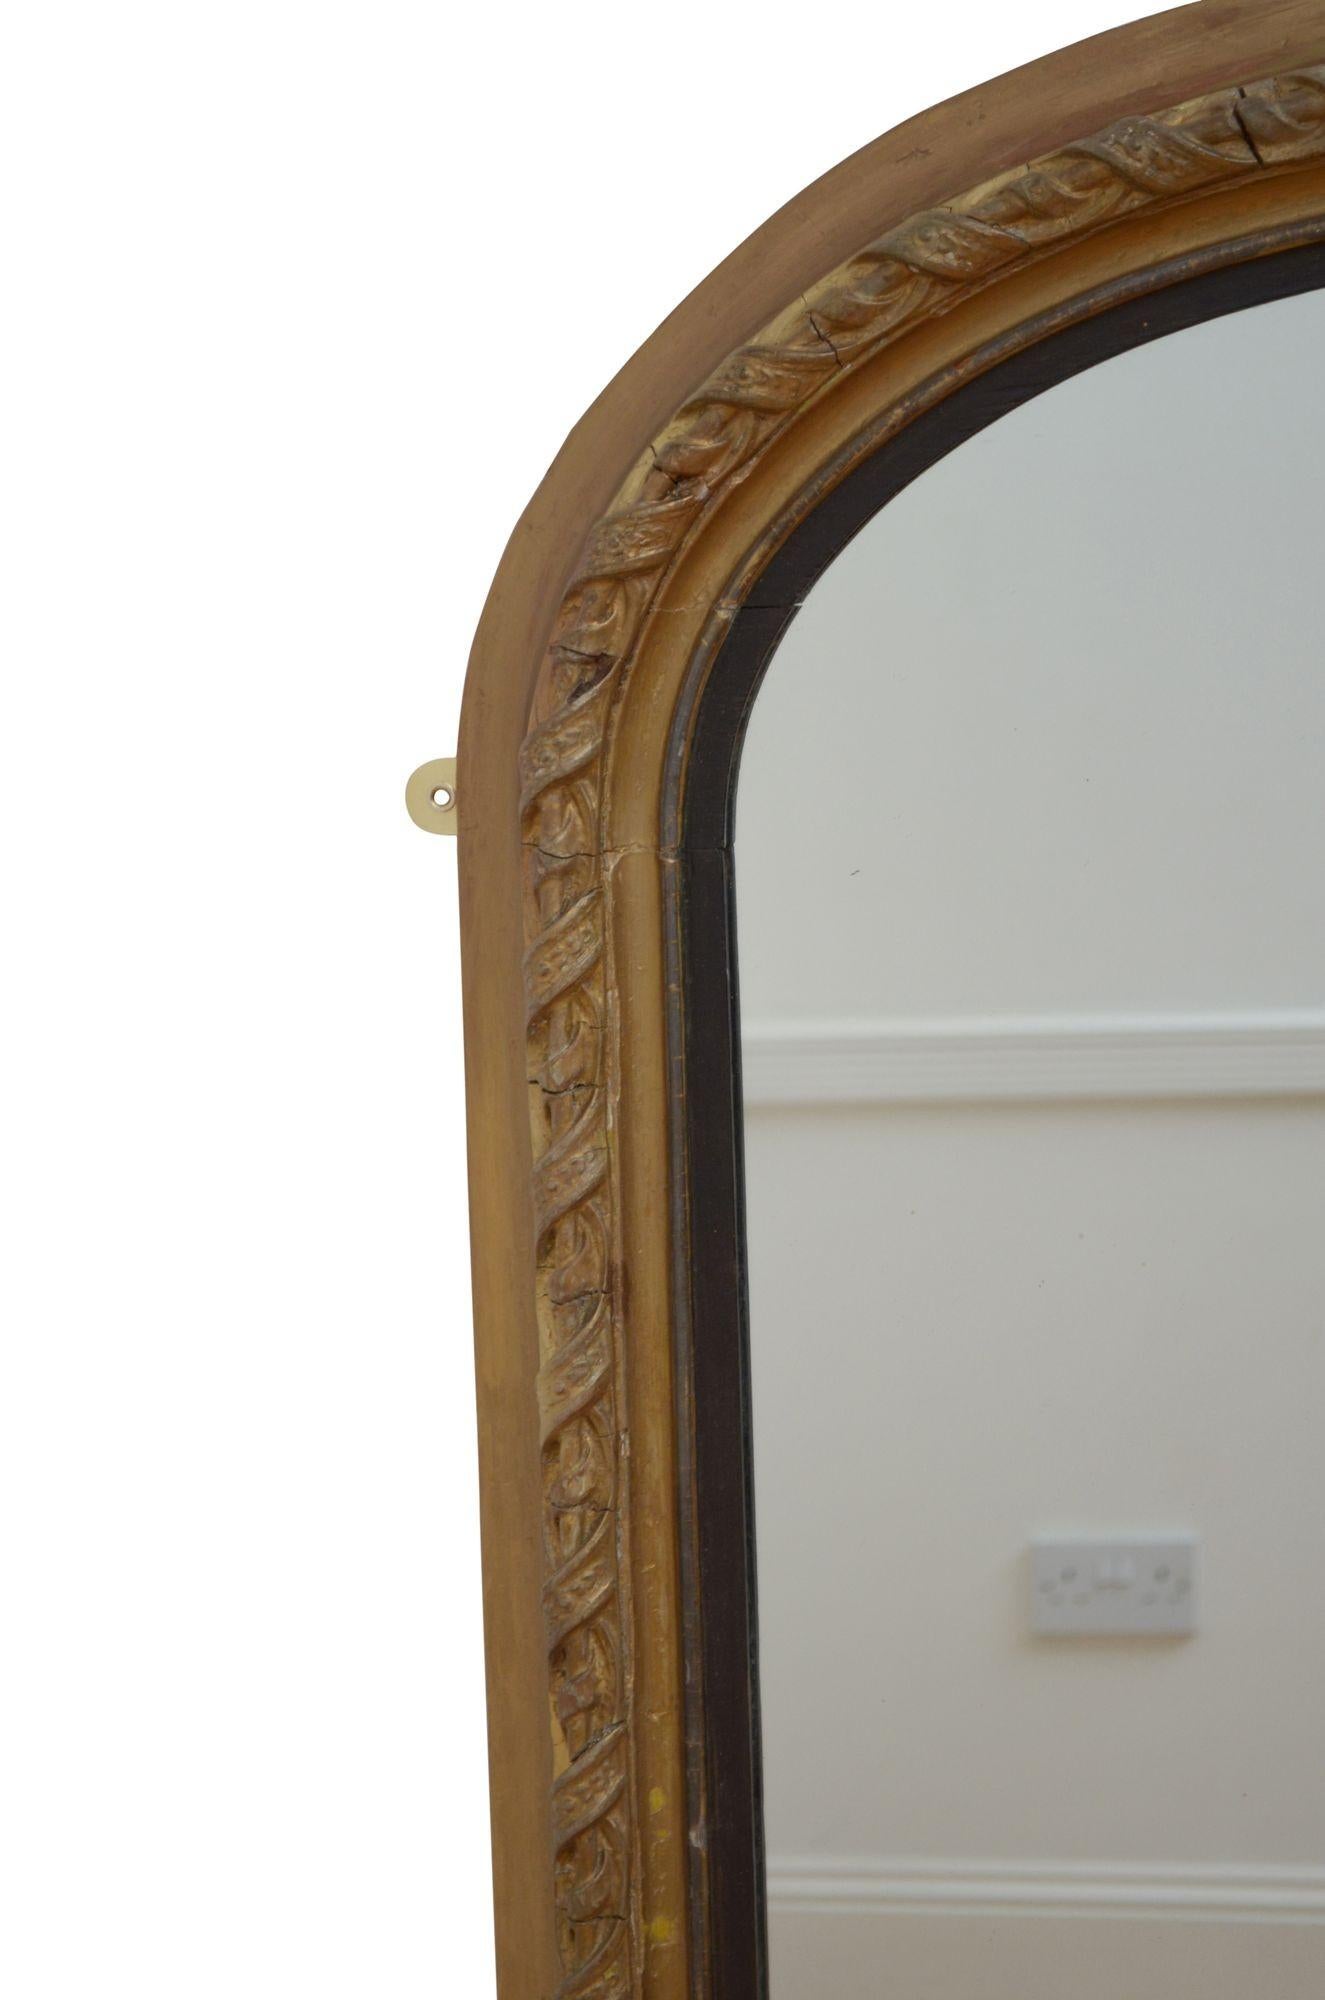 Large 19th Century Gilded Wall Mirror In Good Condition For Sale In Whaley Bridge, GB